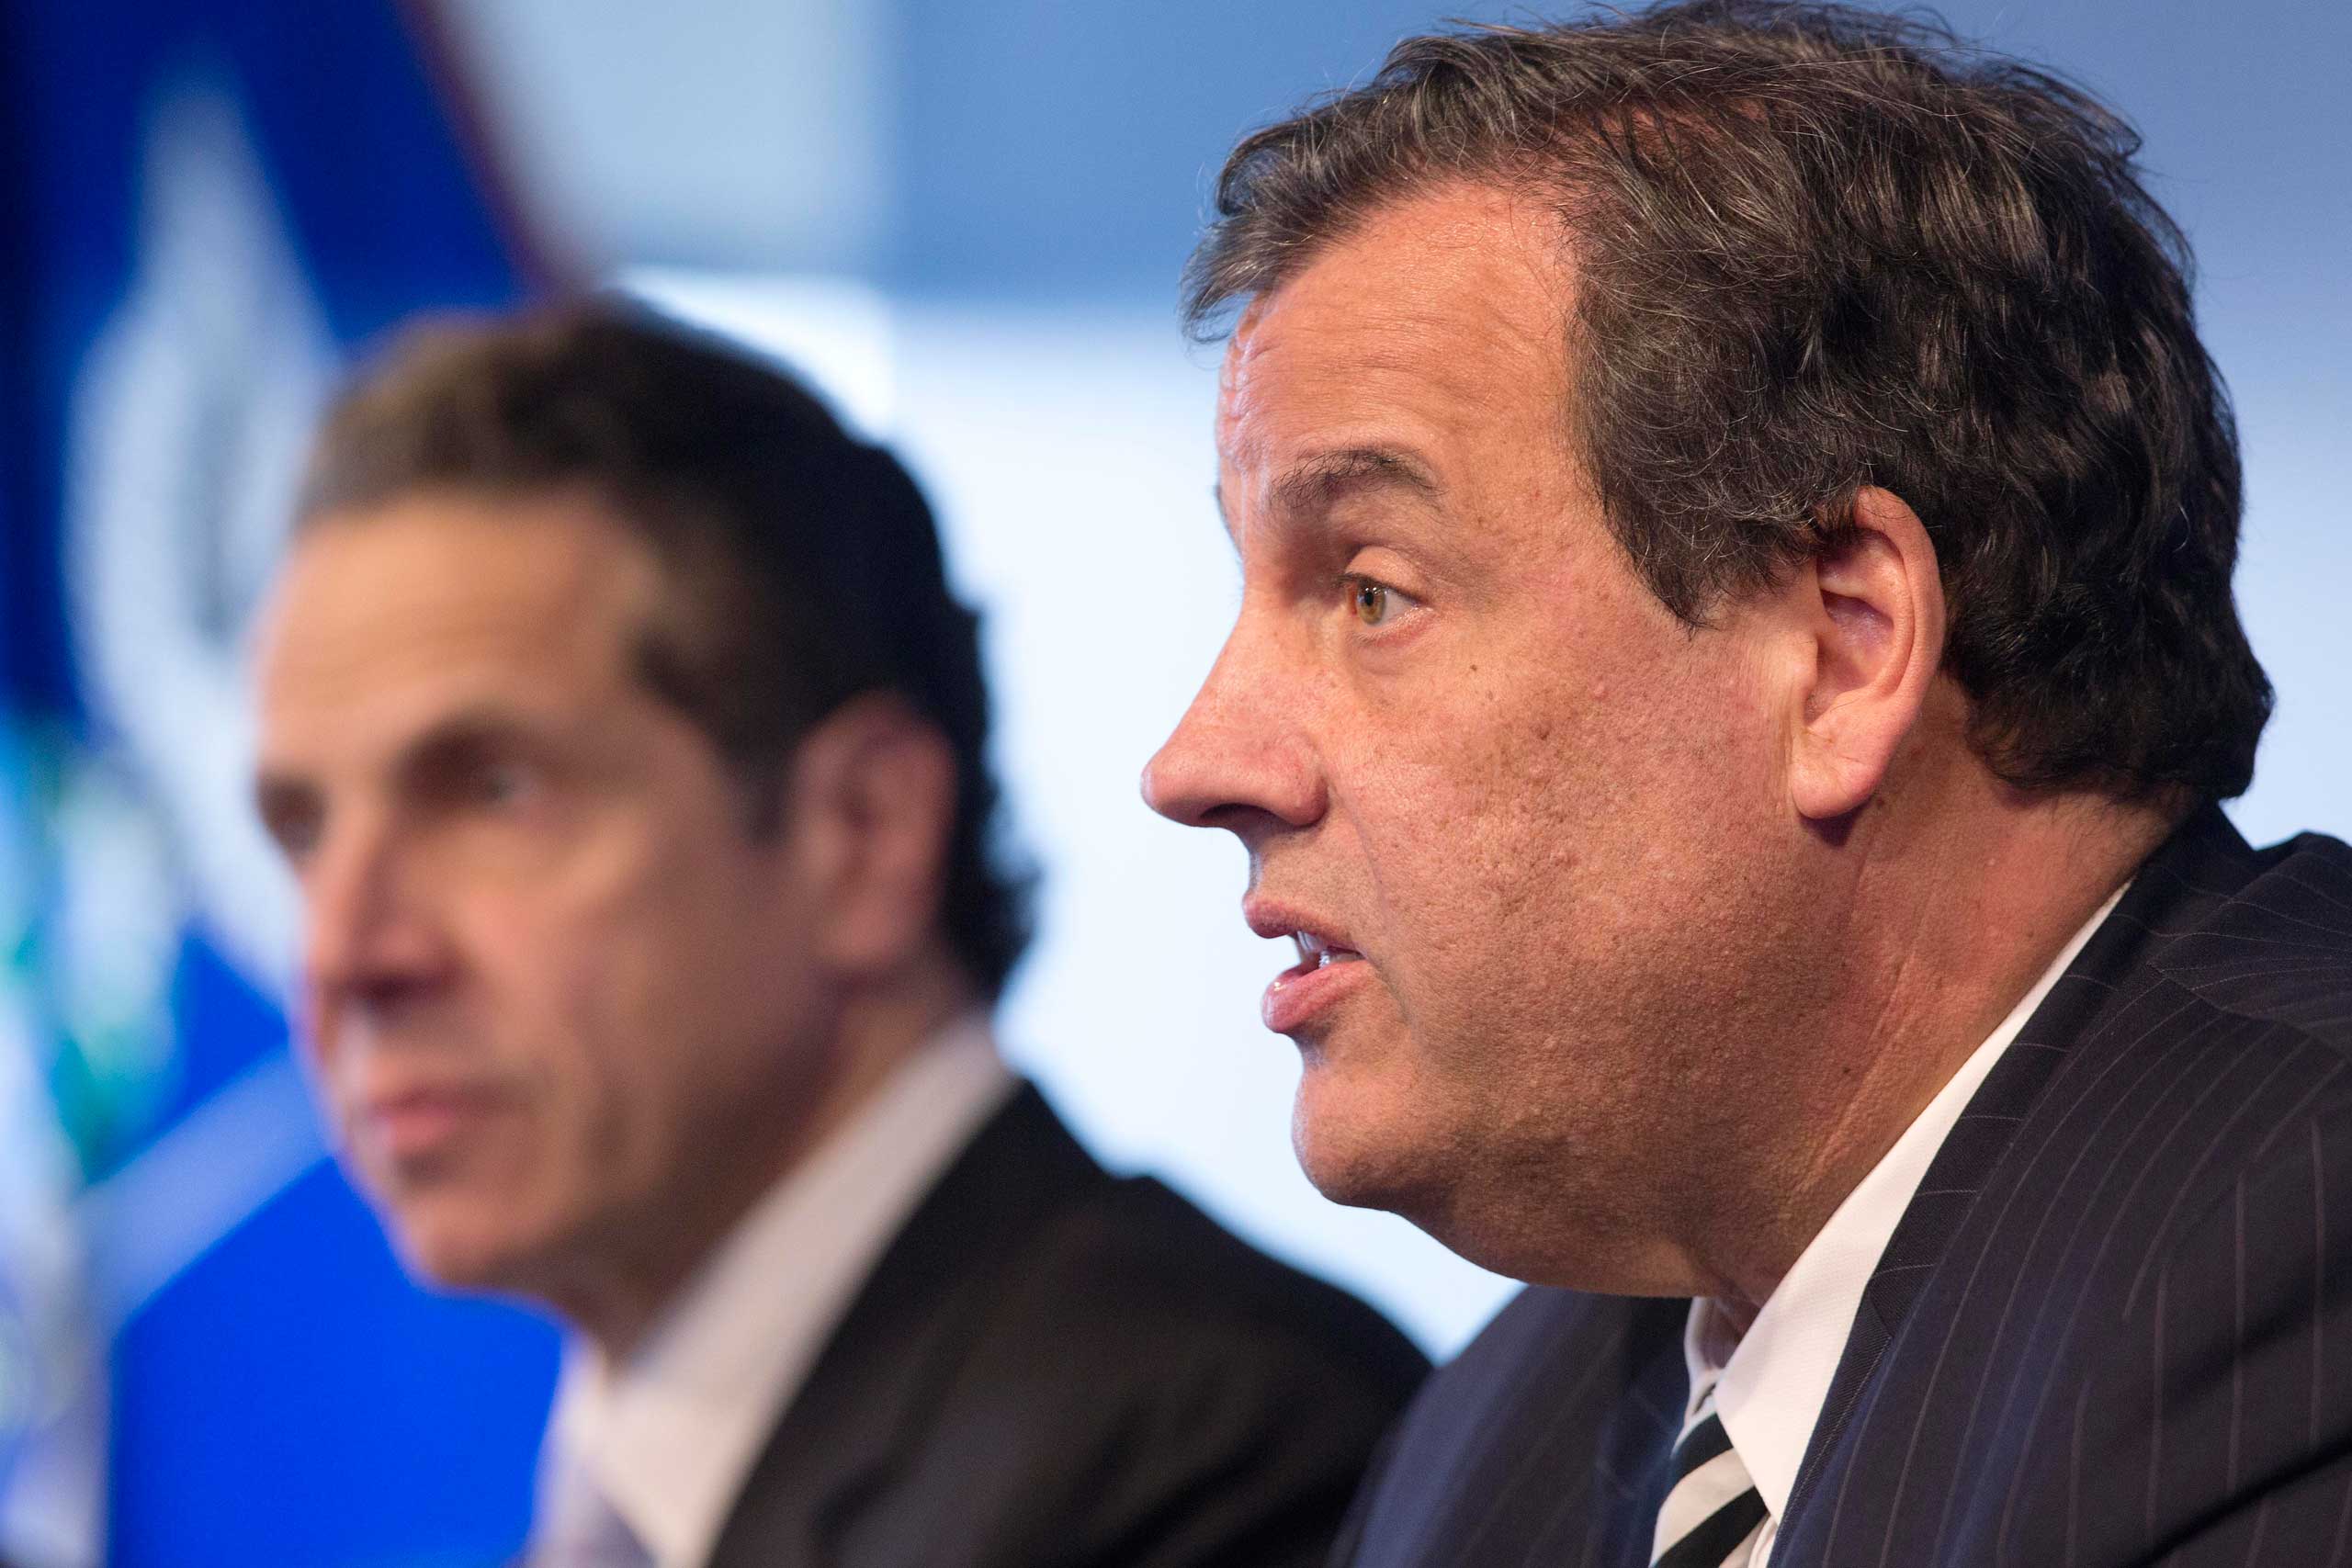 New York Governor Andrew Cuomo, left, listens as New Jersey Governor Chris Christie talks at a news conference, Oct. 24, 2014 in New York. (Mark Lennihan—AP)